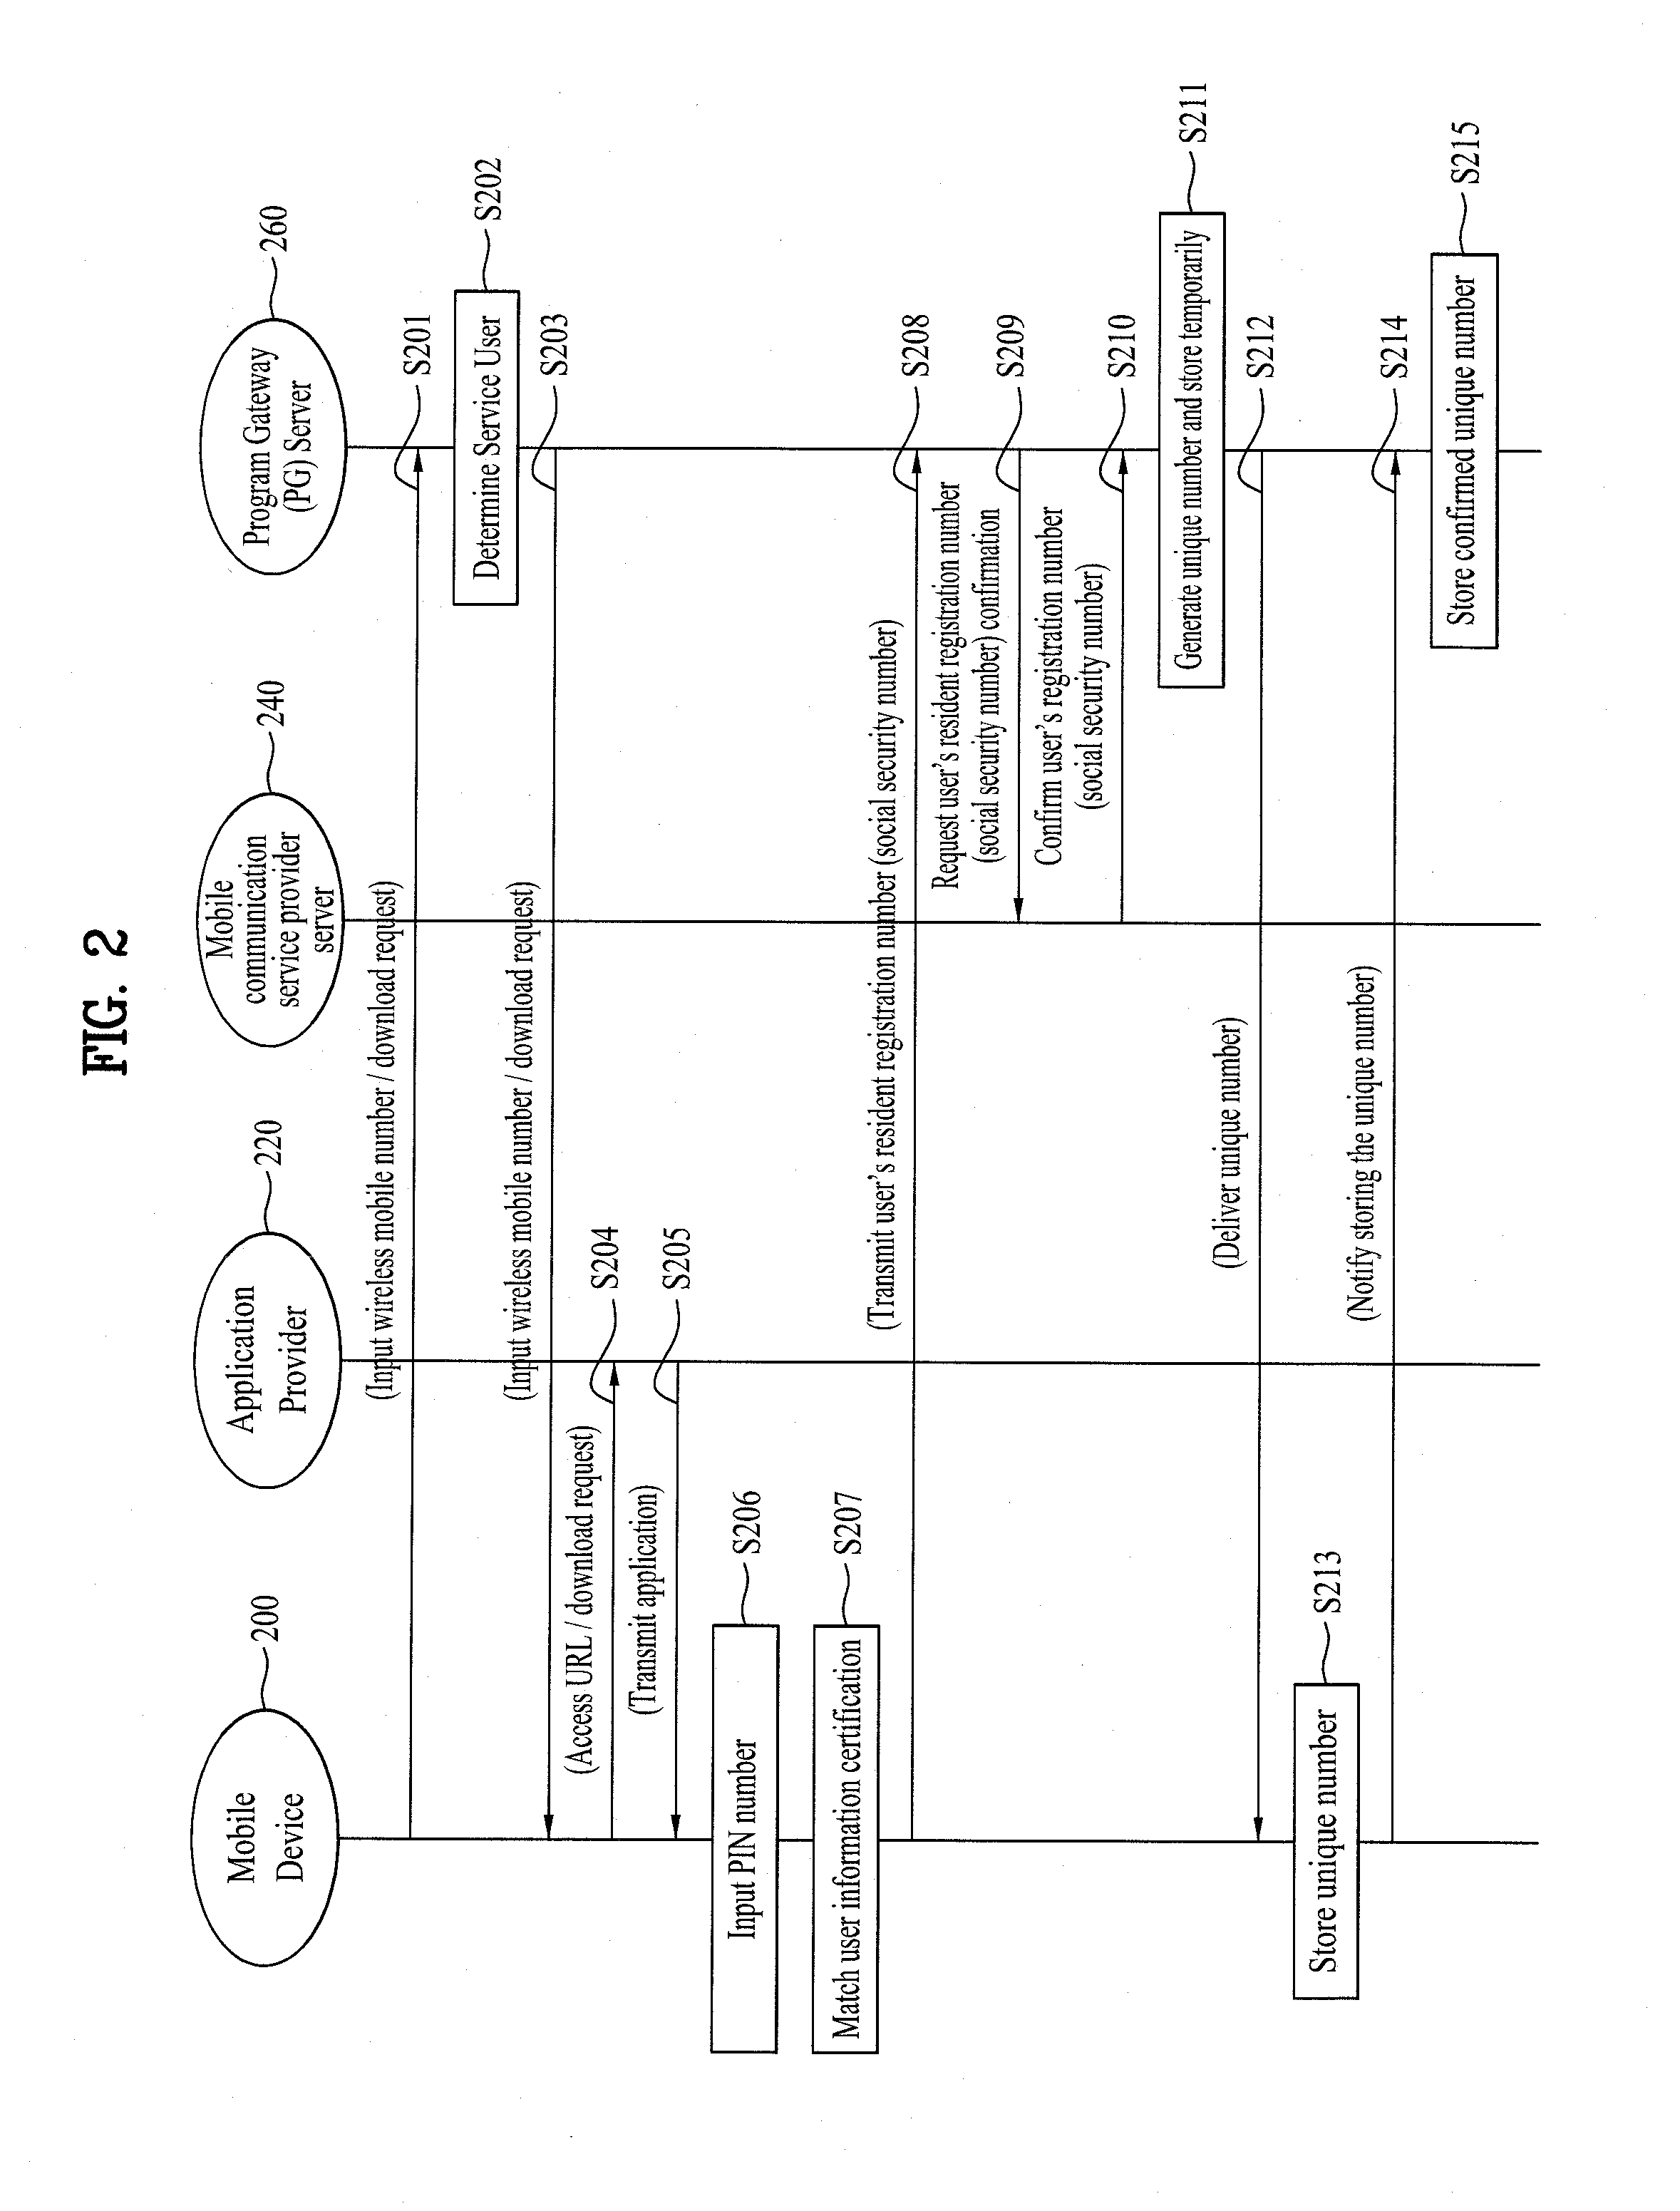 Method of controlling system and mobile device for processing payment and data